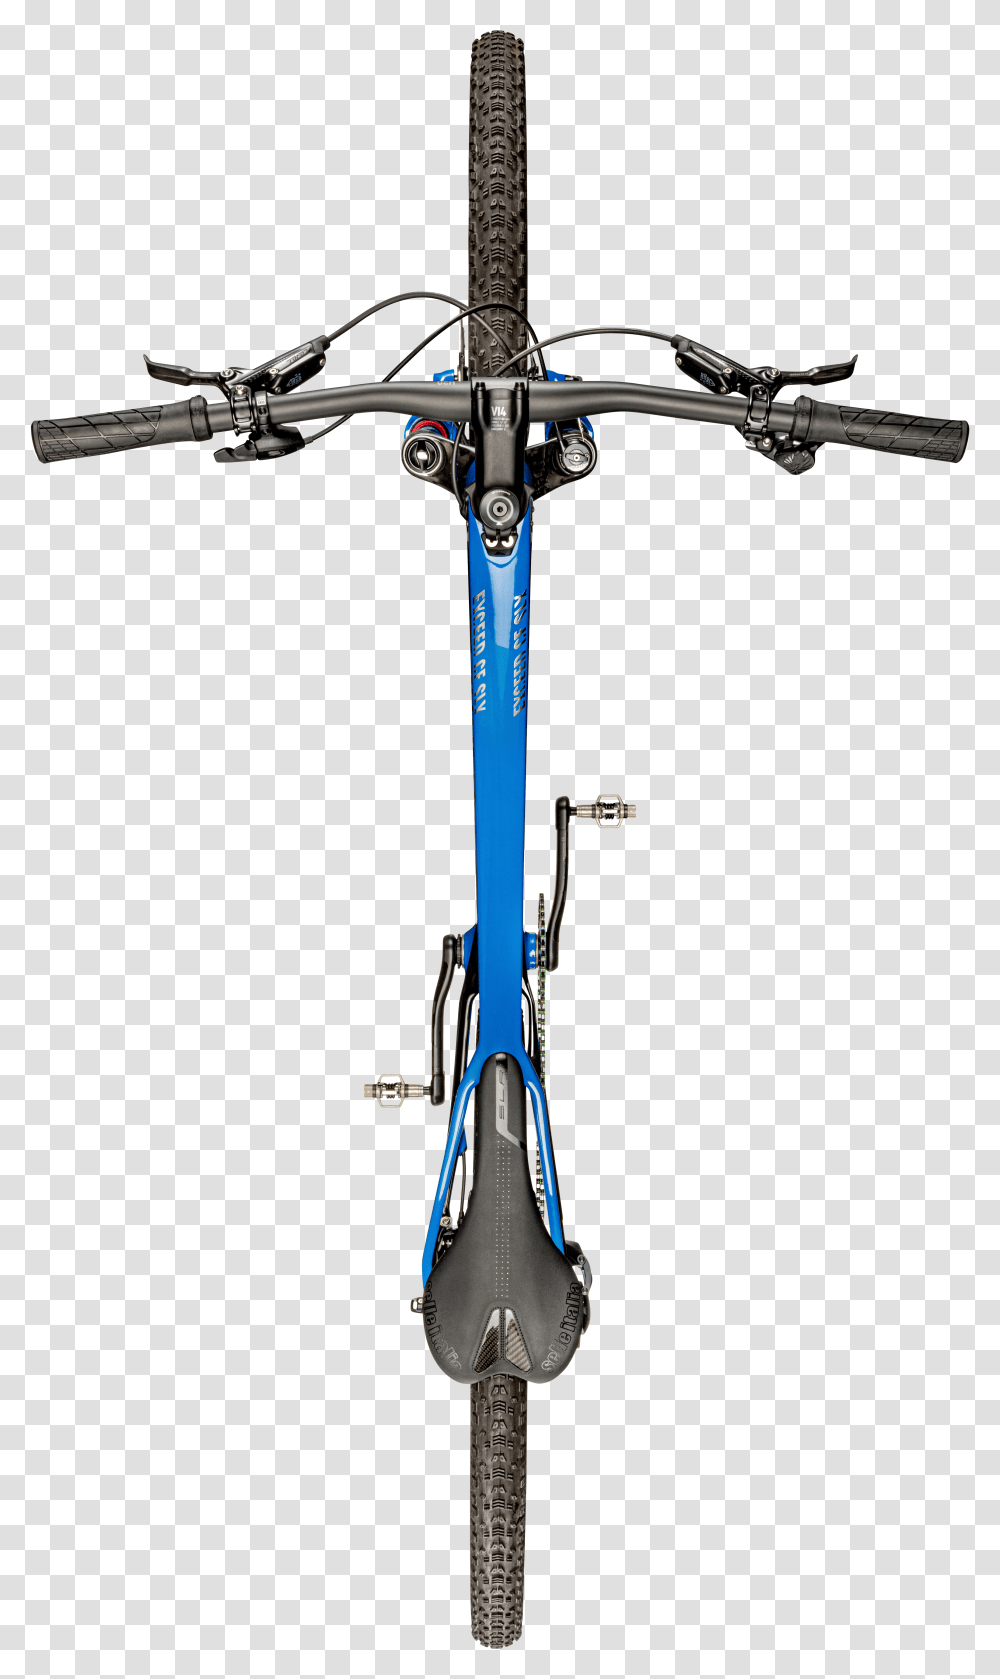 Exceed Canyon Exceed Cf Sl 5.0 2020 Transparent Png